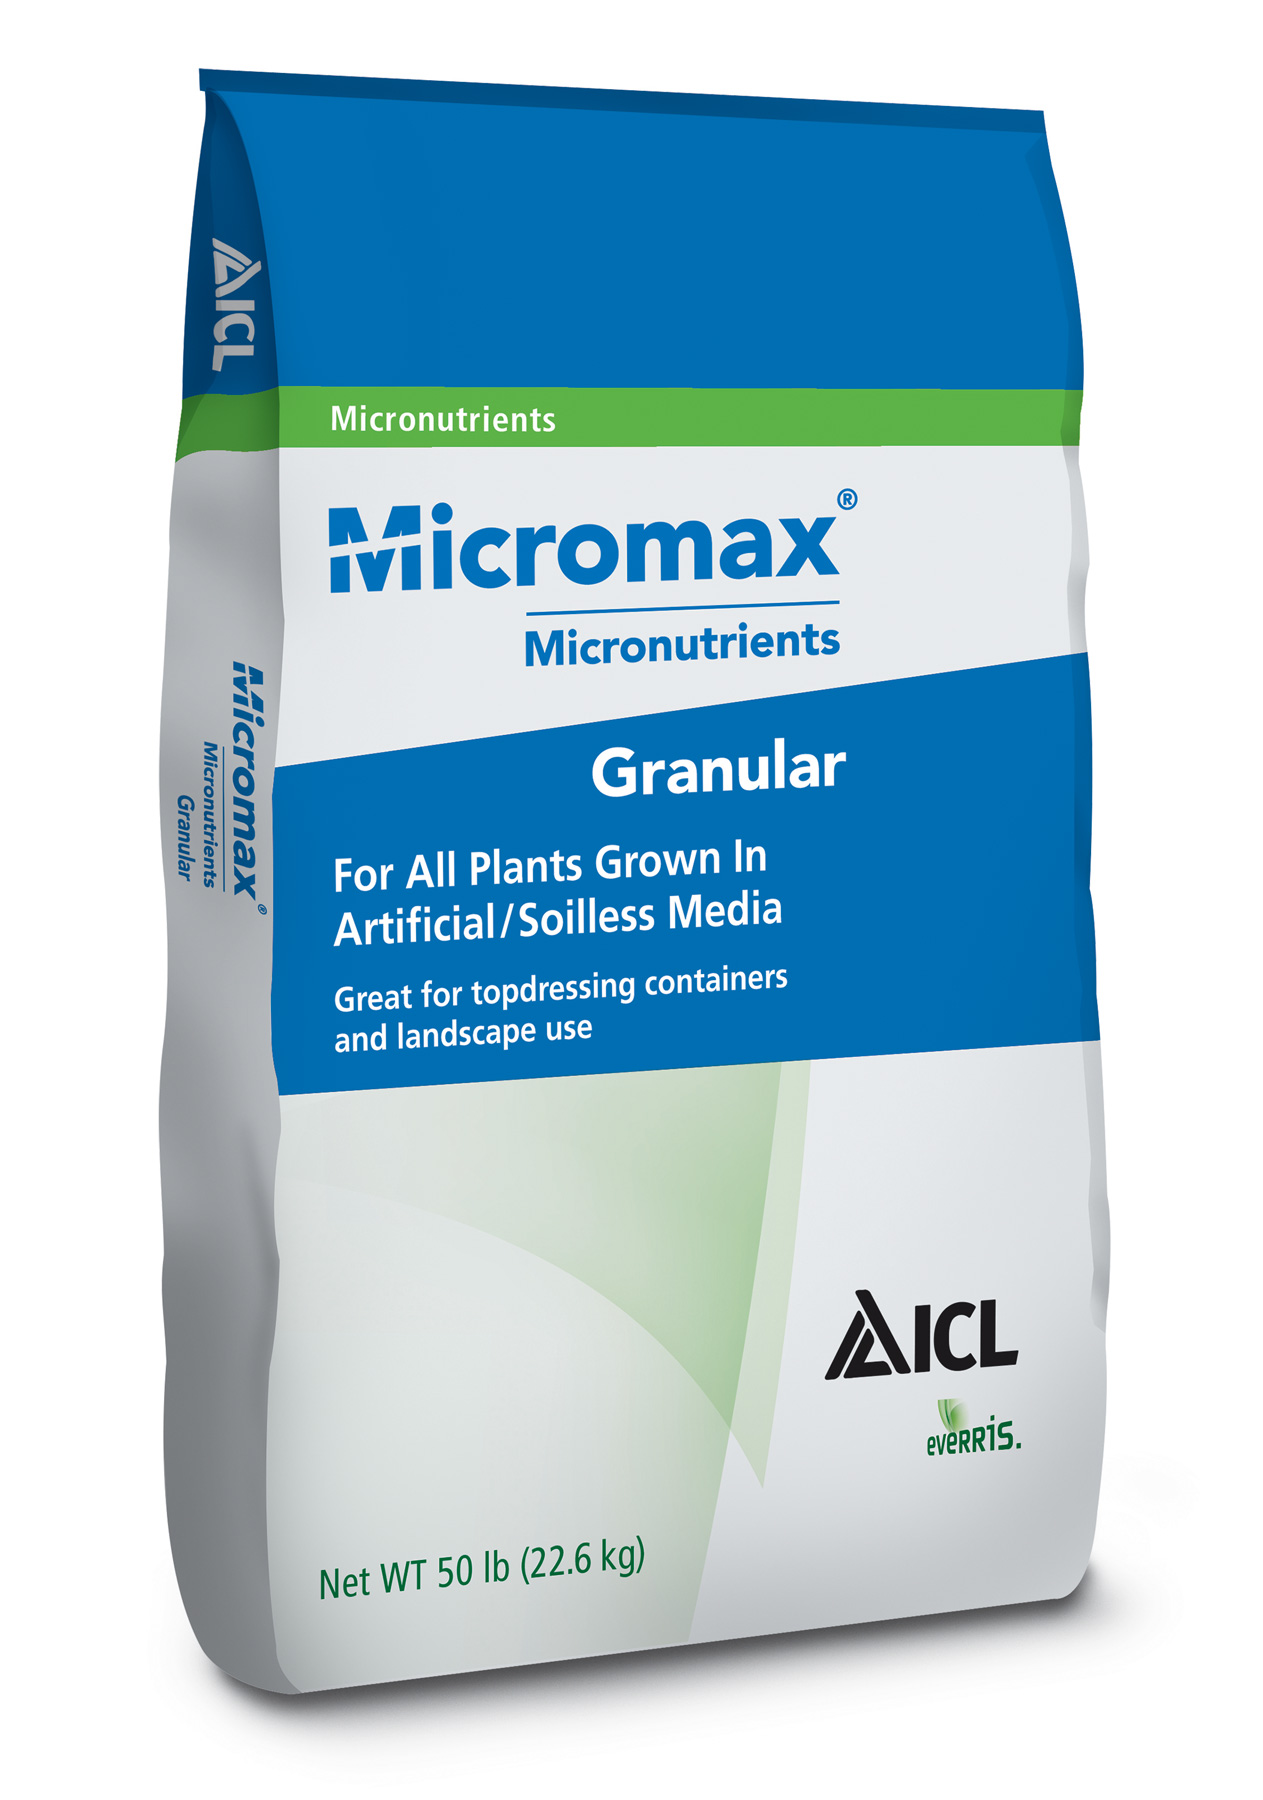 Micromax Micronutrients Granular 50 lb Bag - Controlled Release CRF